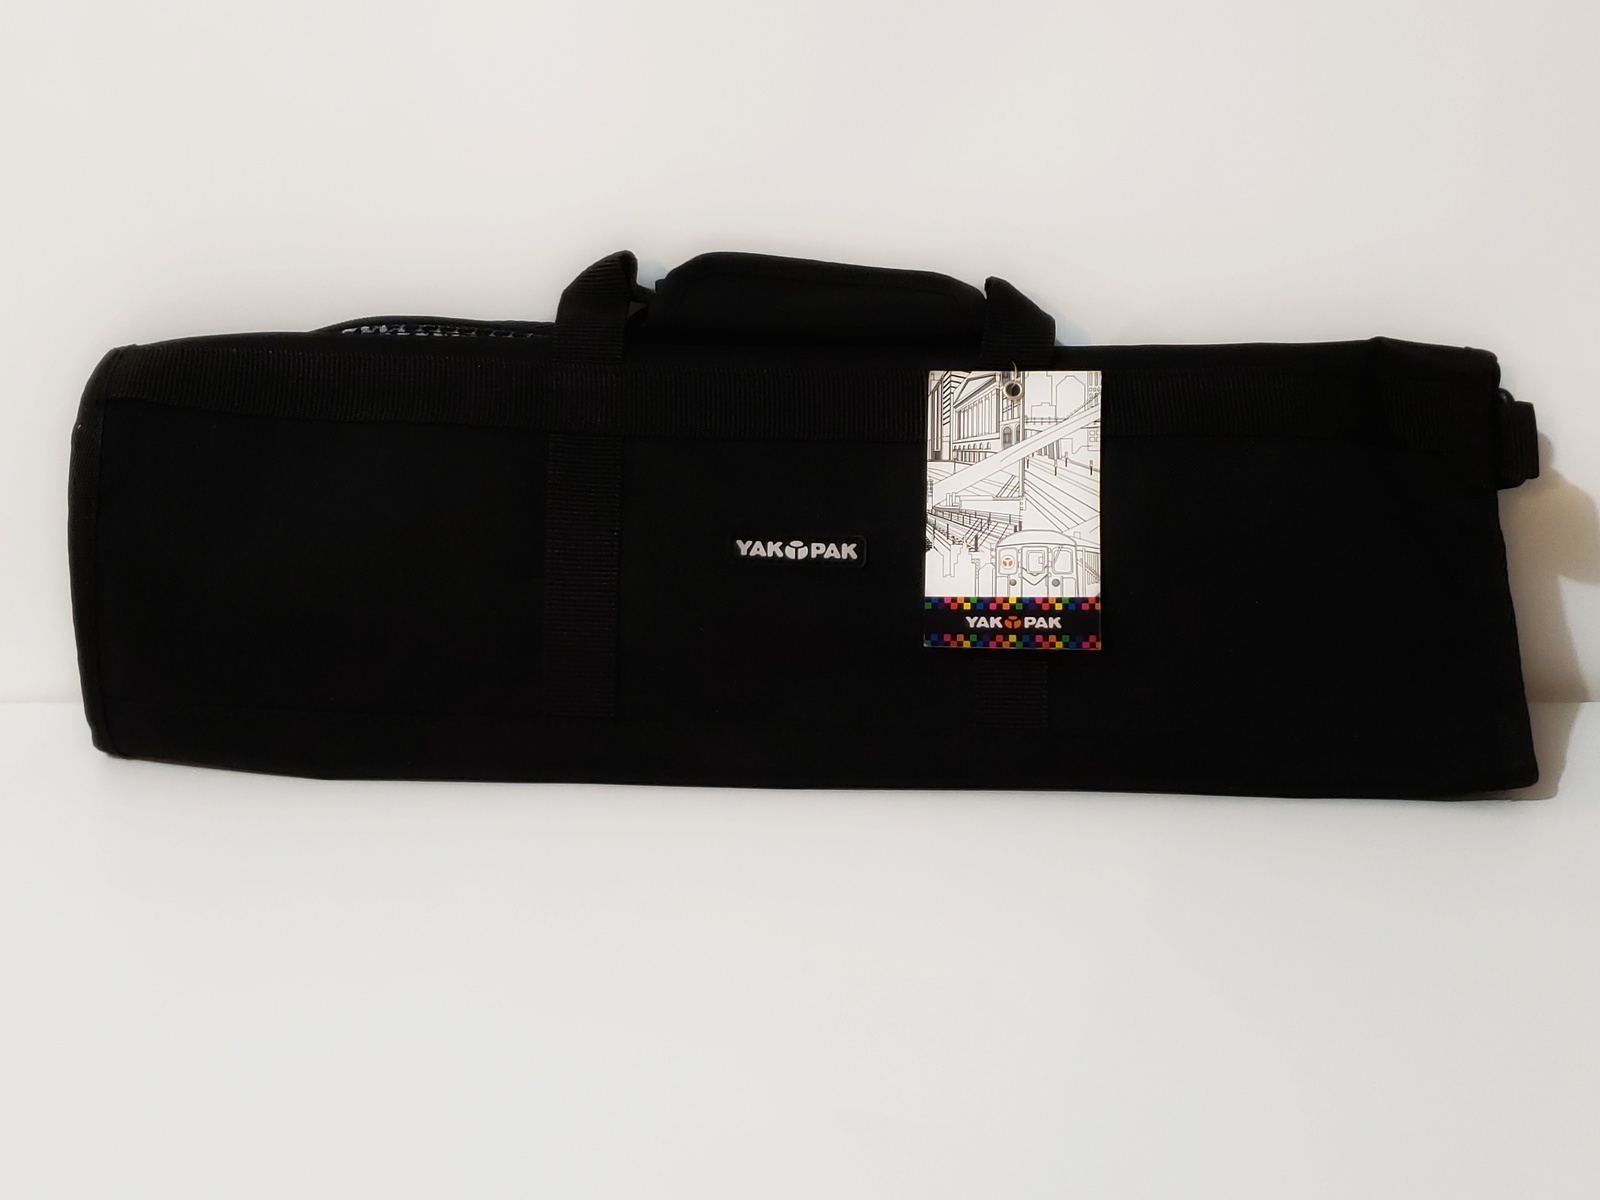 Primary image for Yakpak Black and White Portable Knife Roll Holder, New with tags